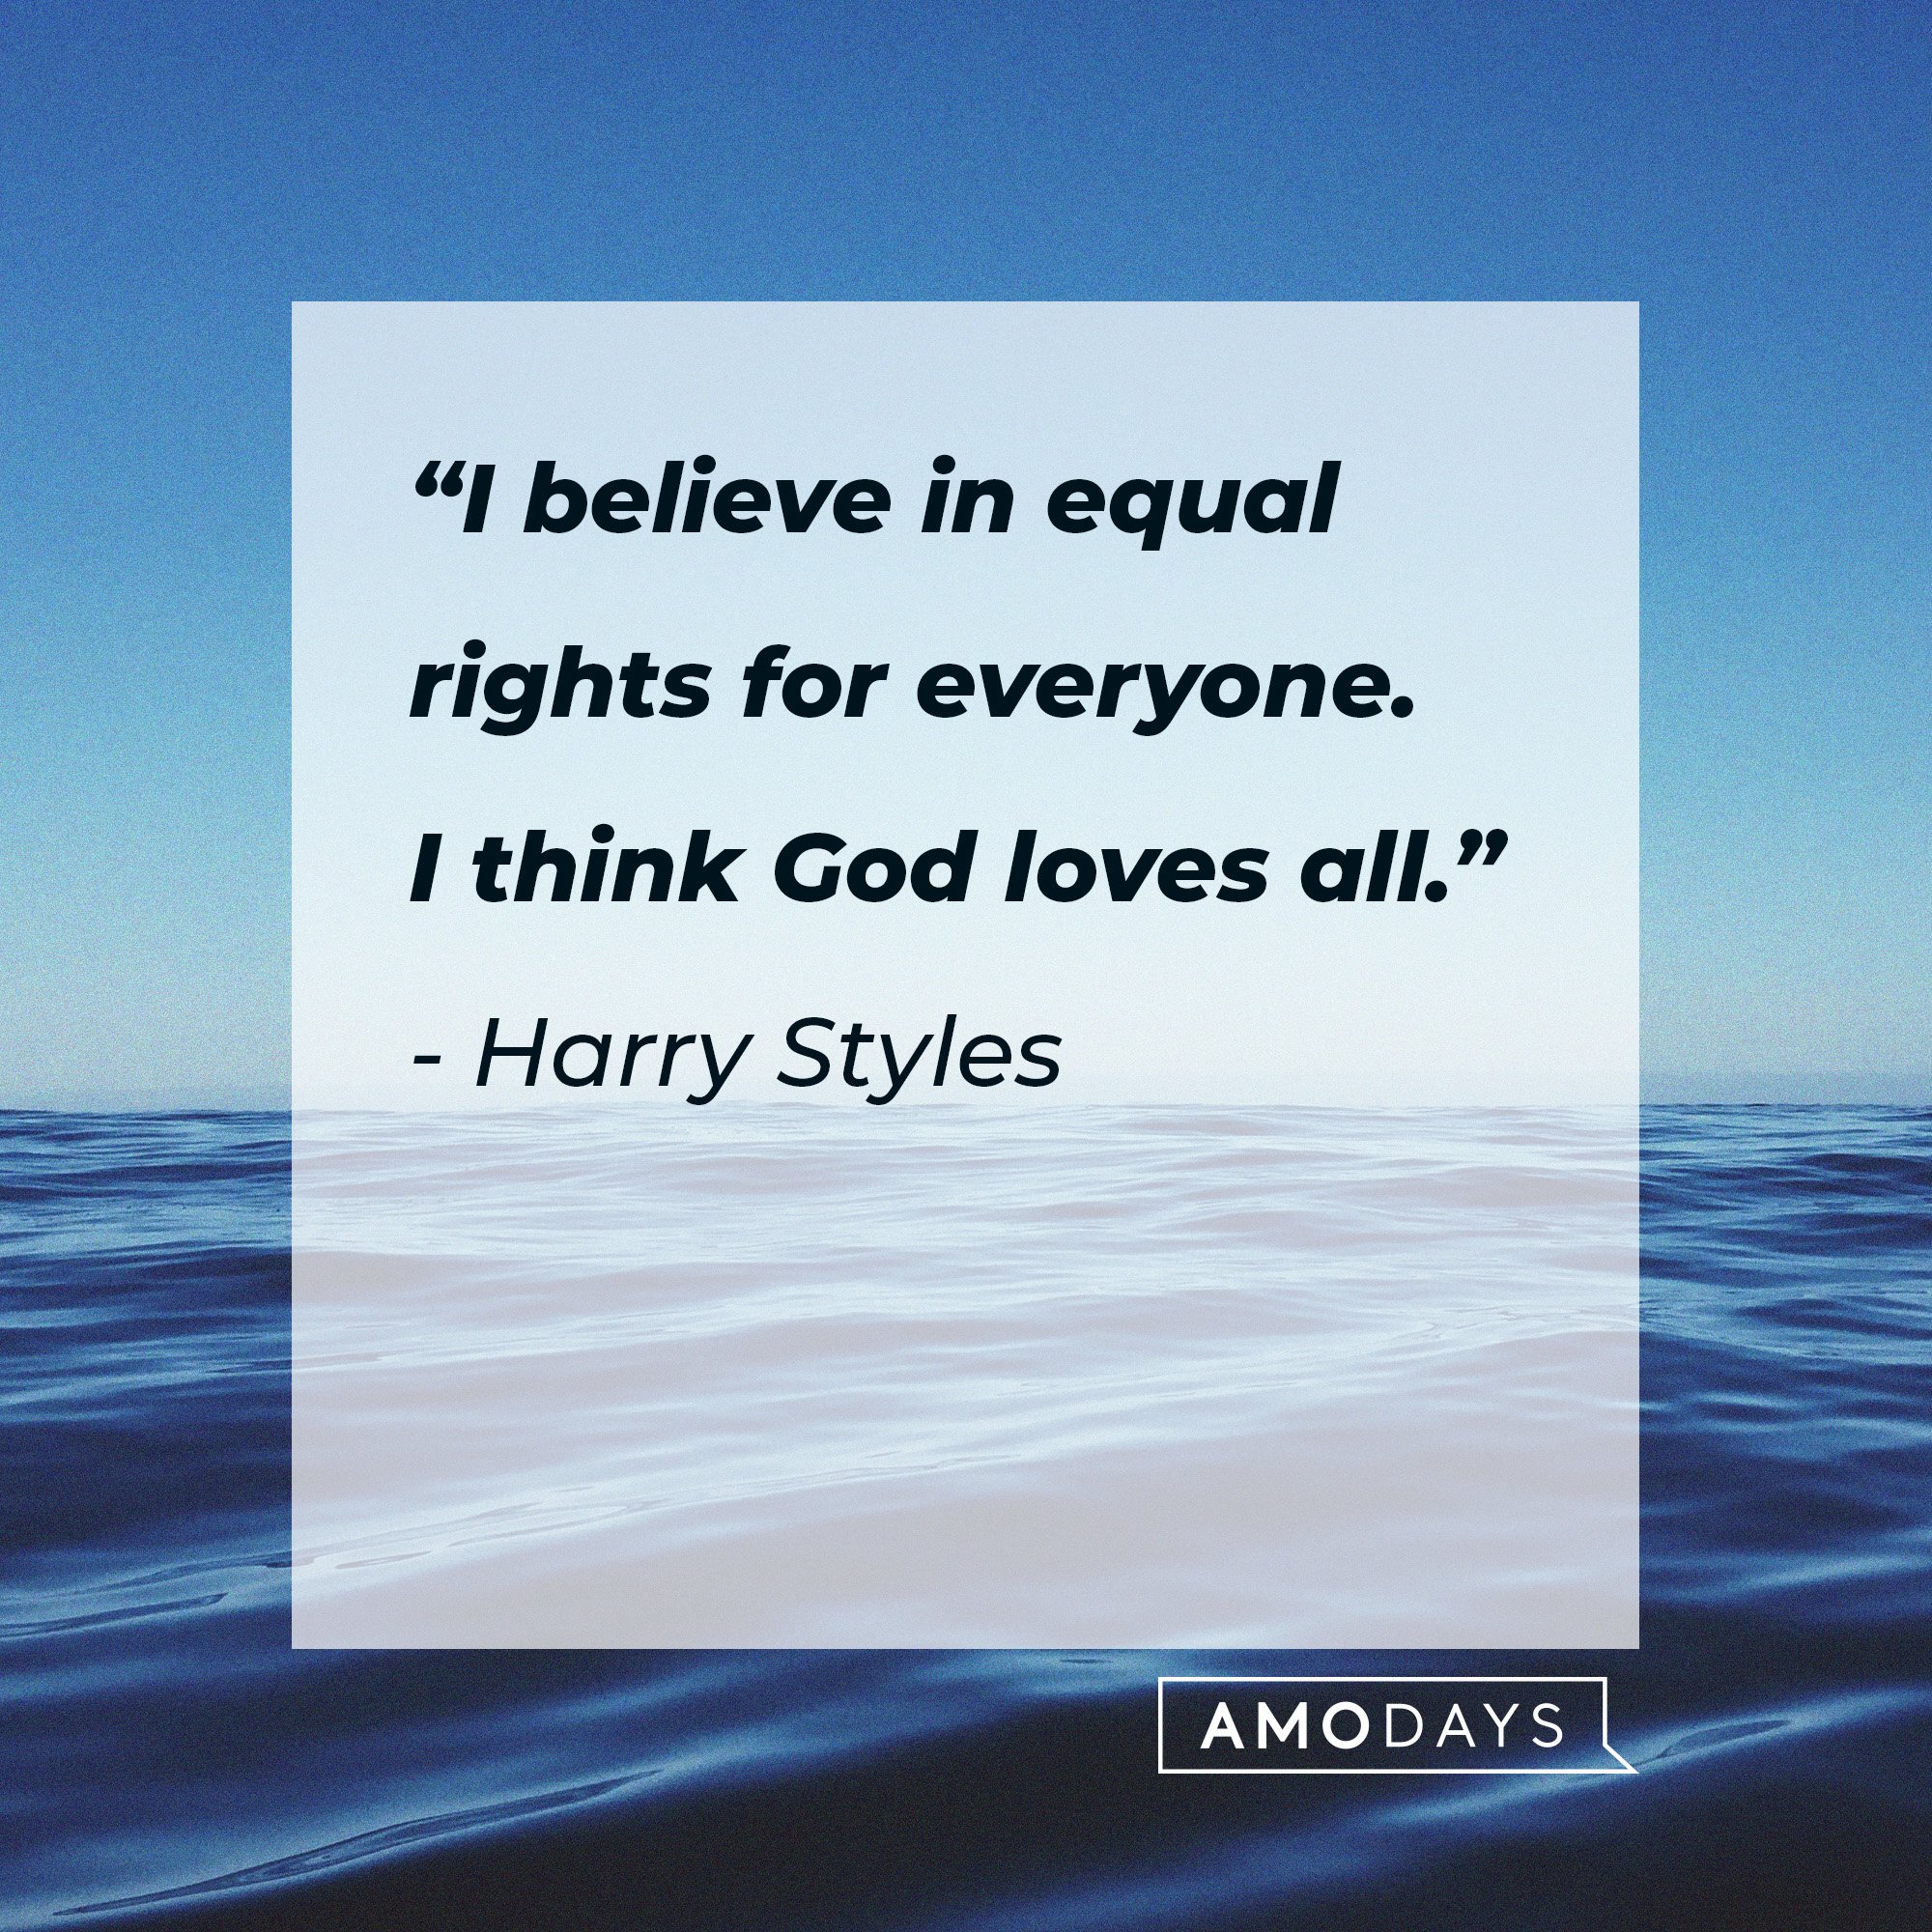 Harry Styles’ quote: I believe in equal rights for everyone. I think God loves all.”  | Source: AmoDays